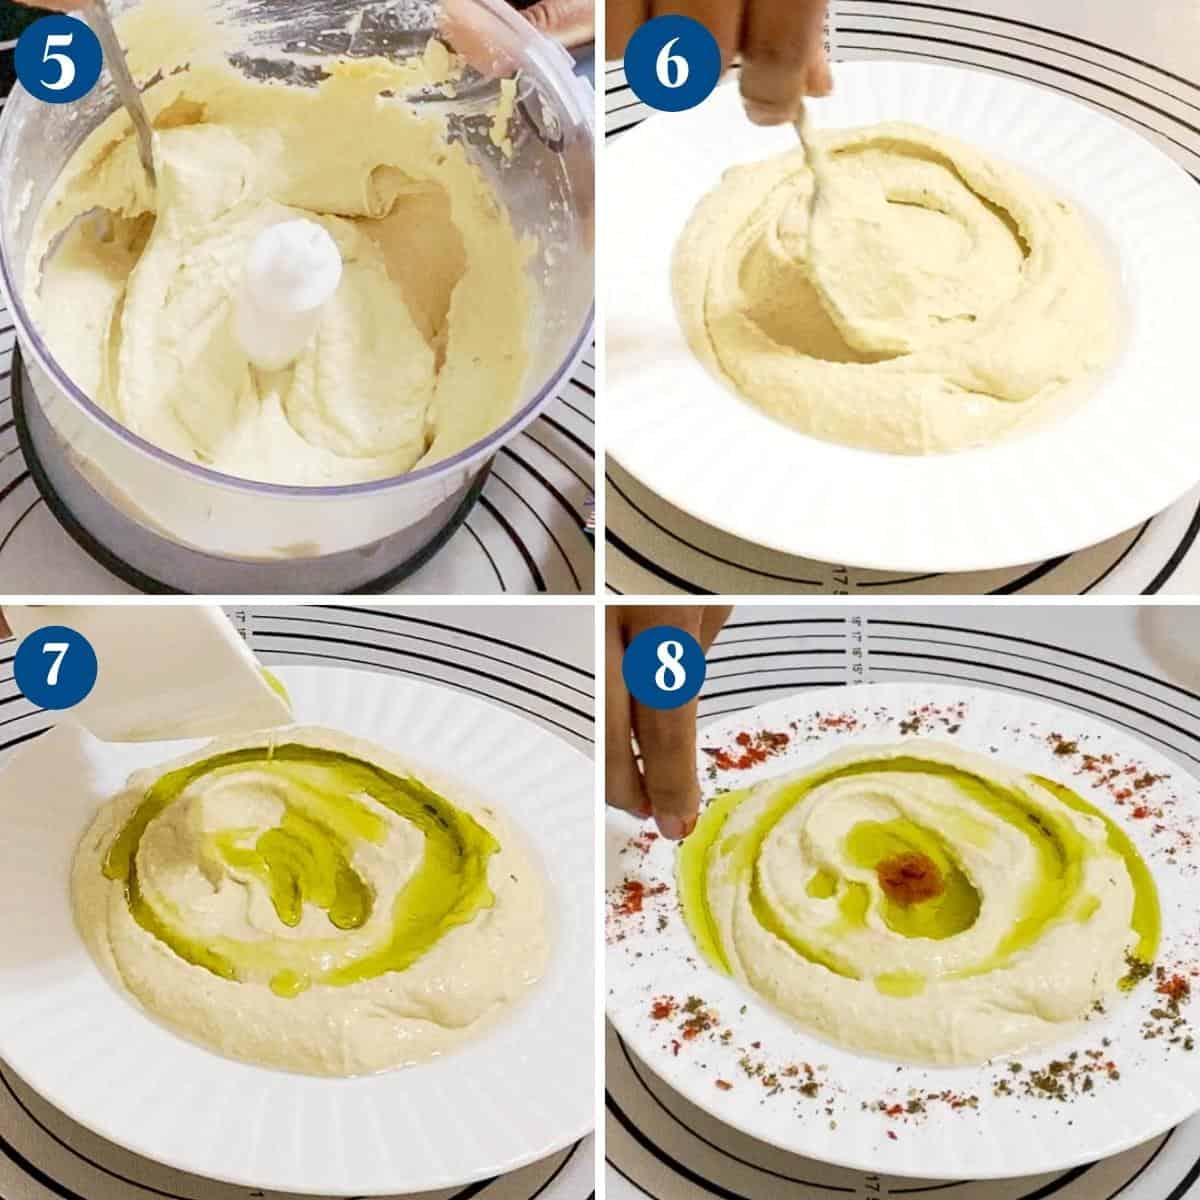 Progress pictures how to serve olive oil.